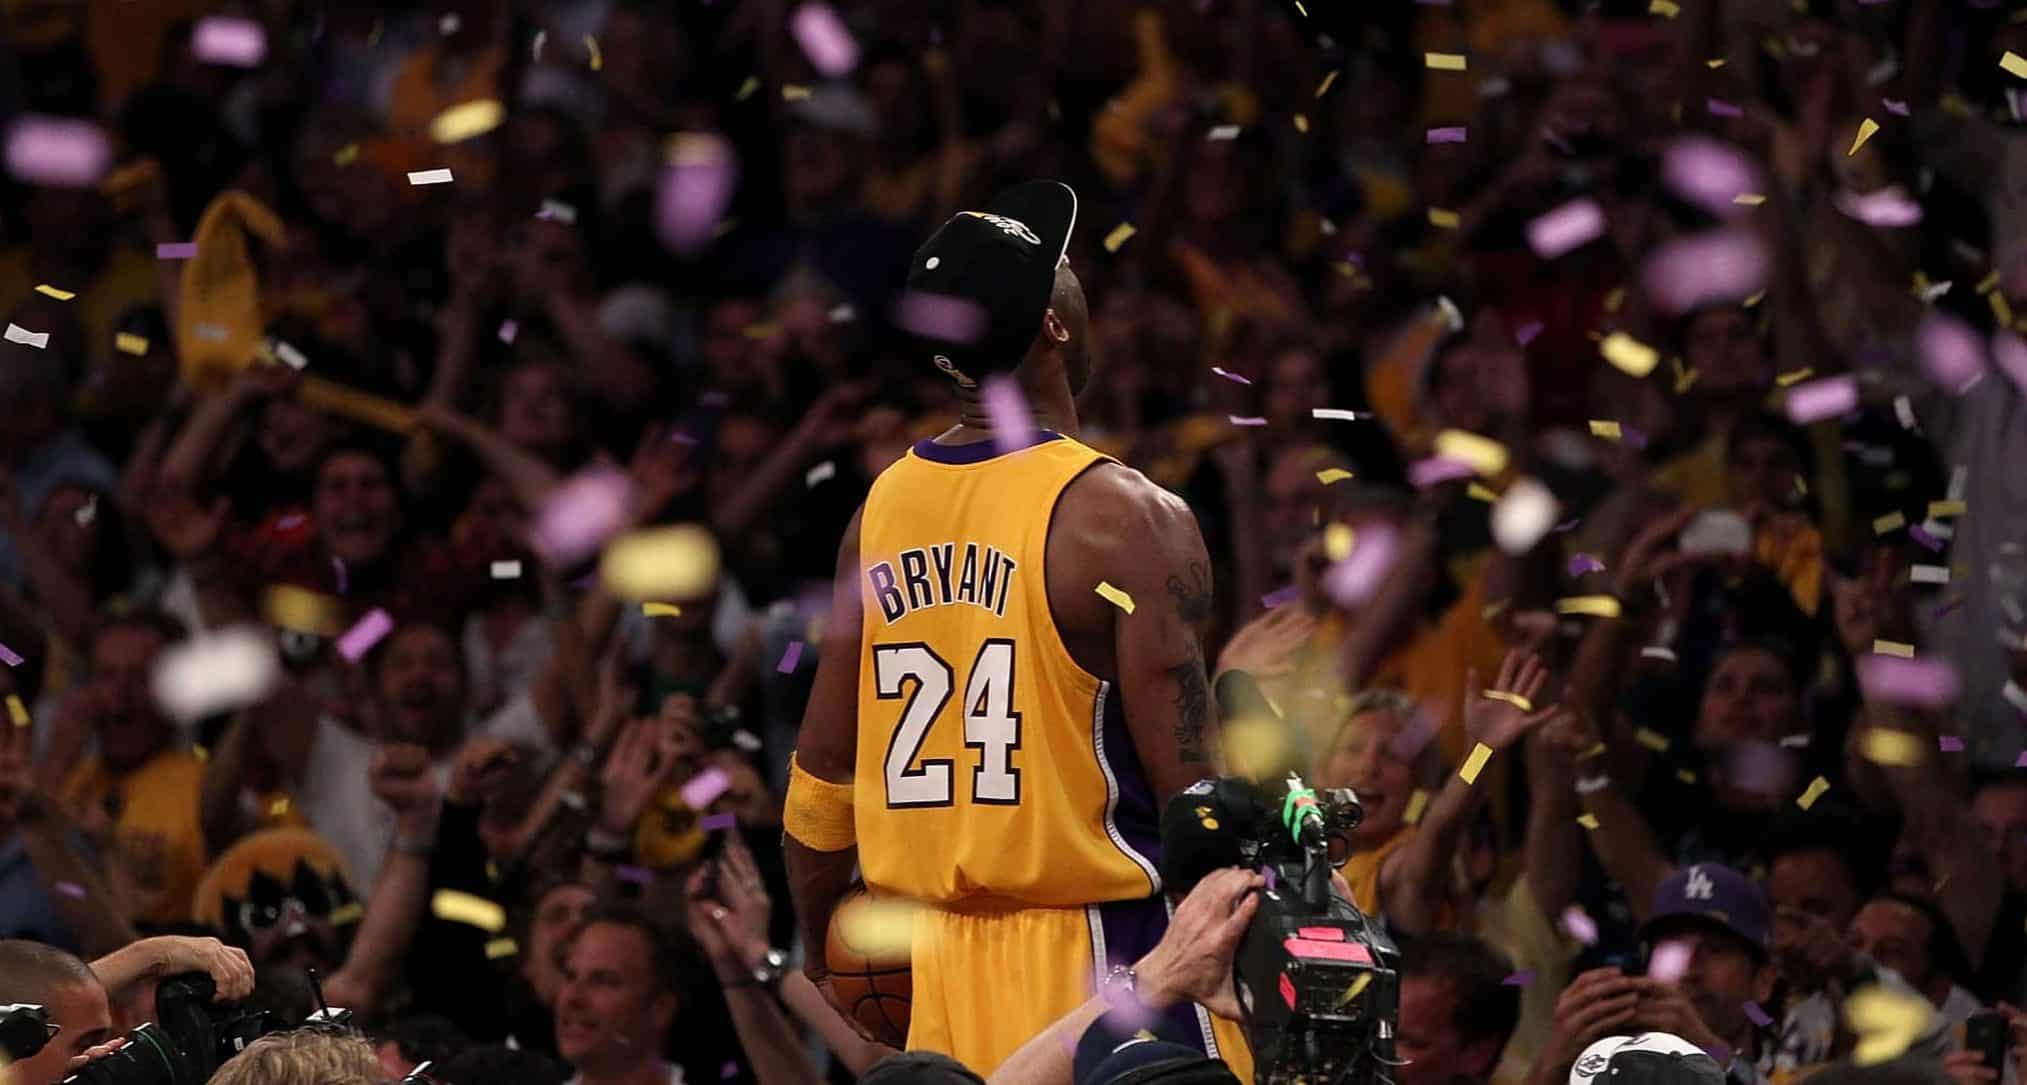 LOS ANGELES, CA - JUNE 17: Kobe Bryant #24 of the Los Angeles Lakers celebrates after the Lakers defeated the Boston Celtics in Game Seven of the 2010 NBA Finals at Staples Center on June 17, 2010 in Los Angeles, California. NOTE TO USER: User expressly acknowledges and agrees that, by downloading and/or using this Photograph, user is consenting to the terms and conditions of the Getty Images License Agreement.